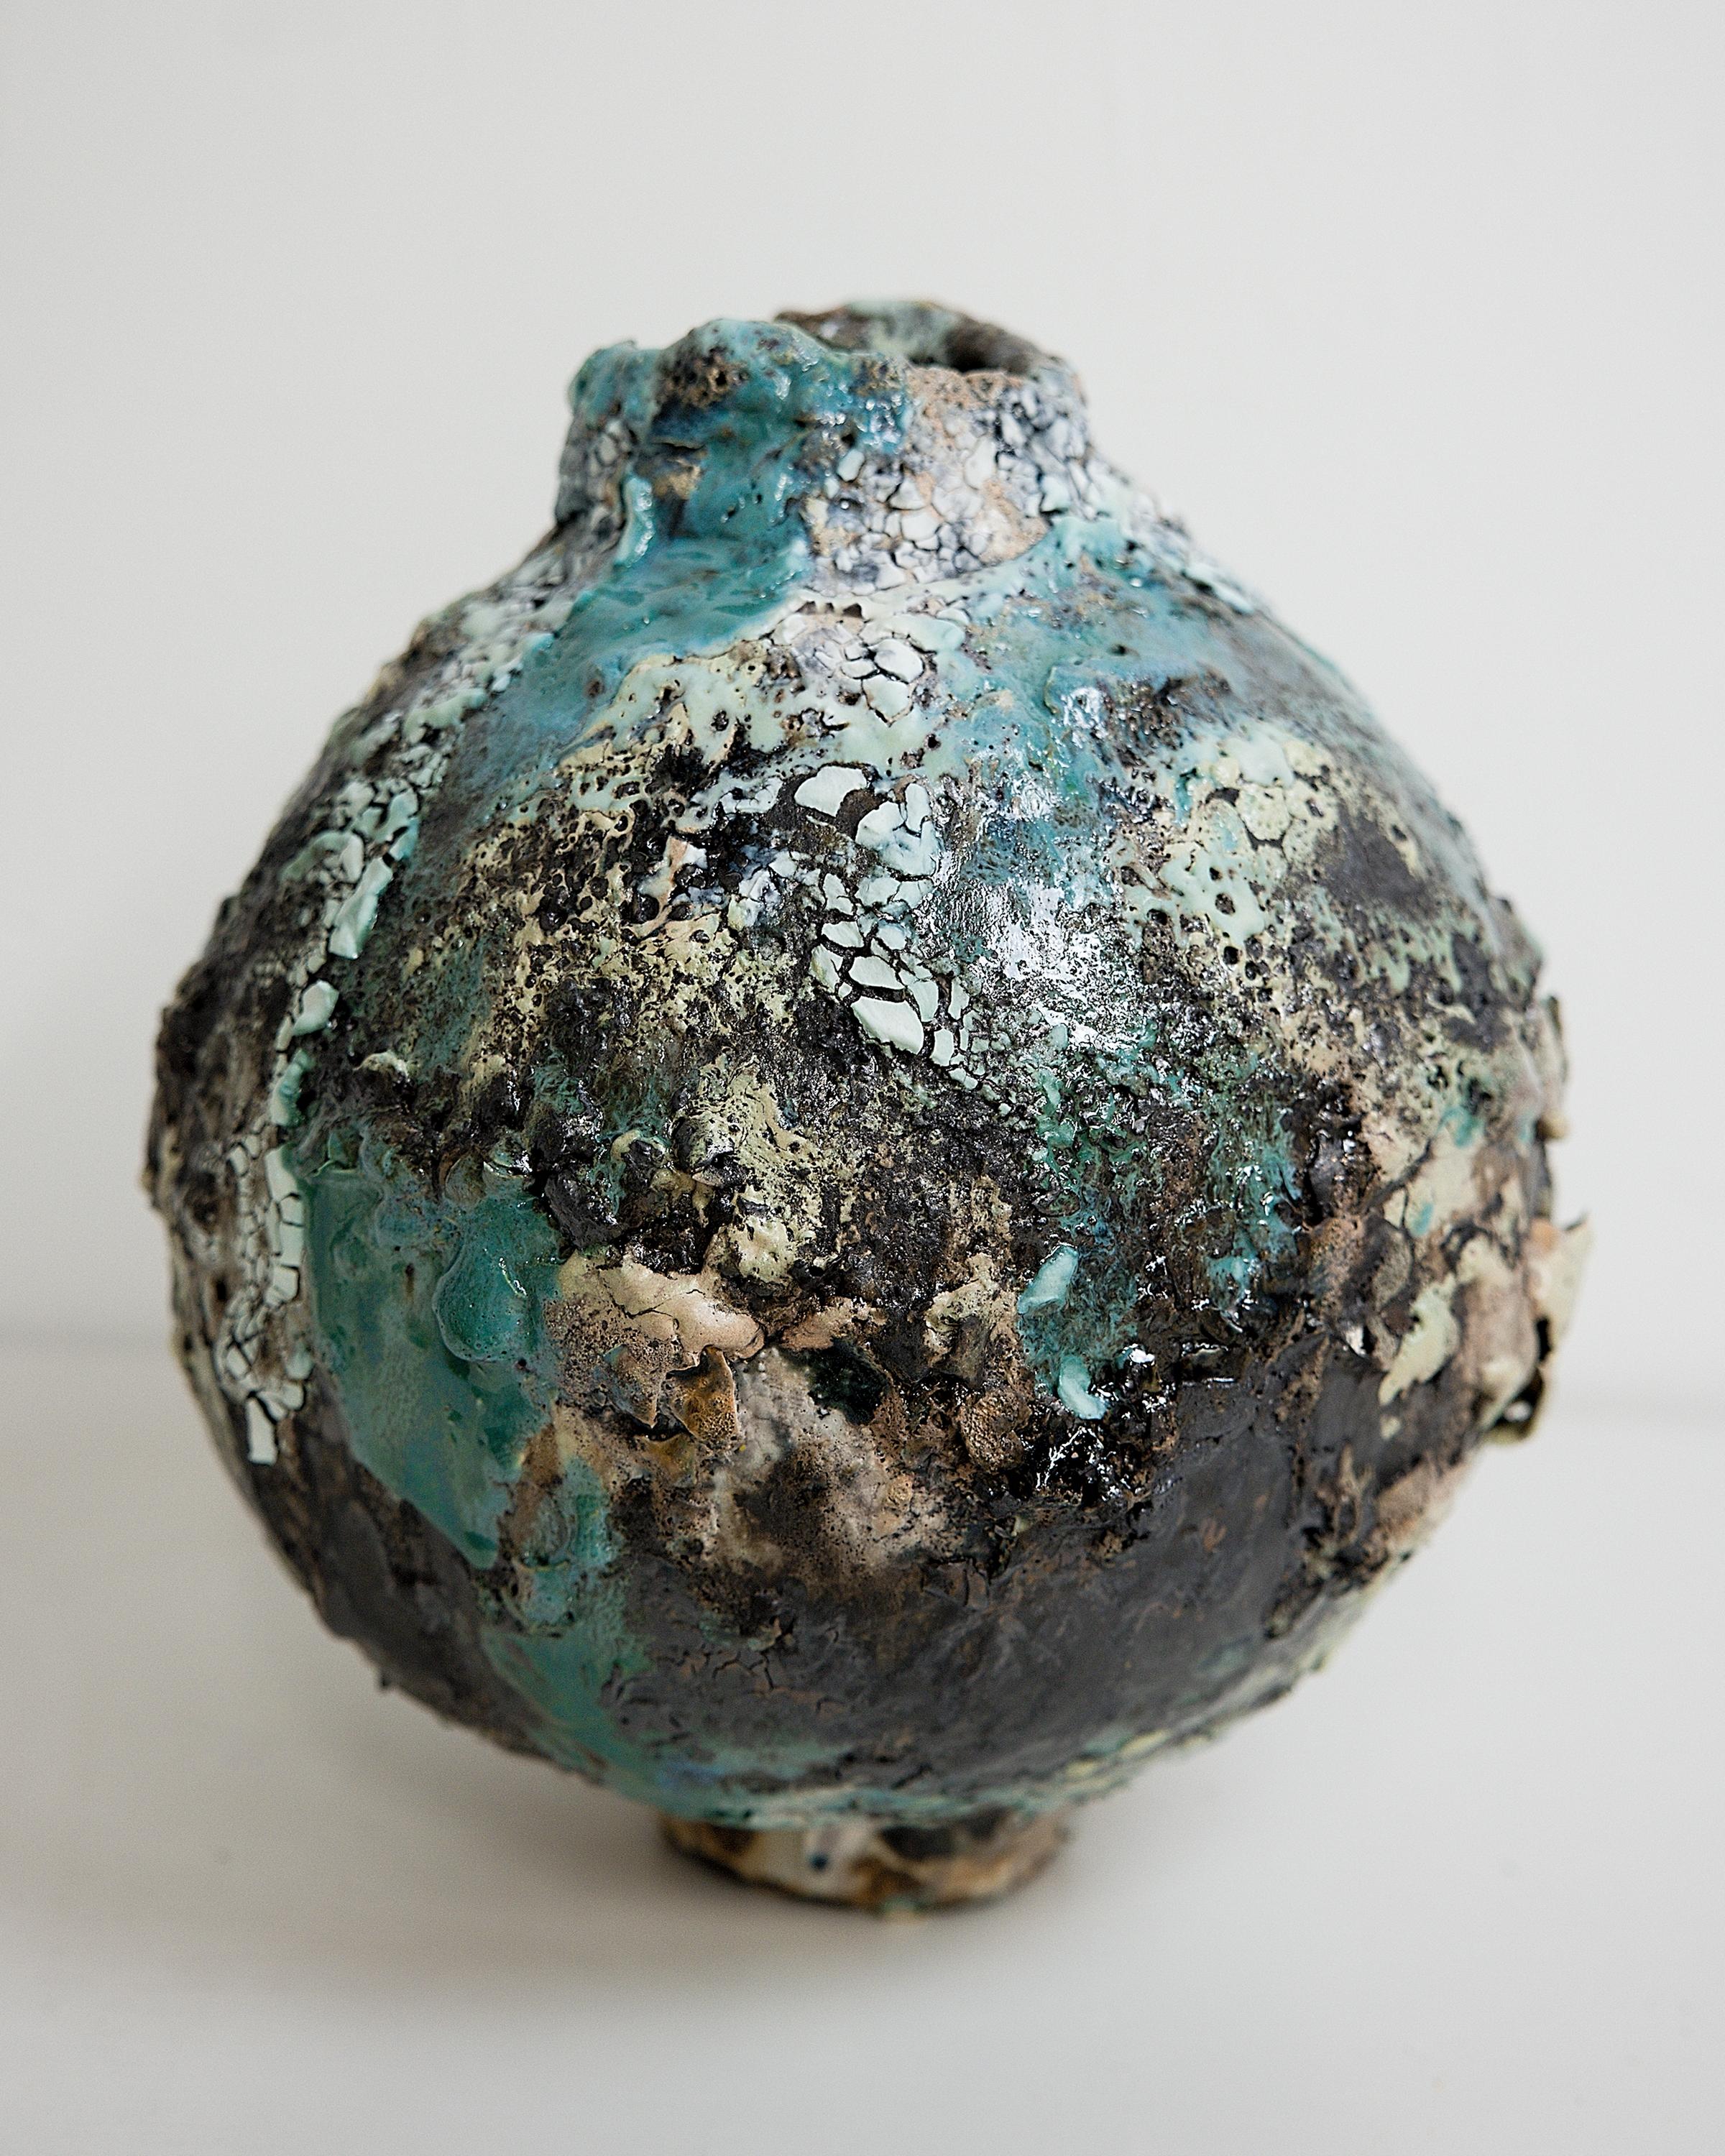 Contemporary Winter Moon Cracked Vase !! For Sale